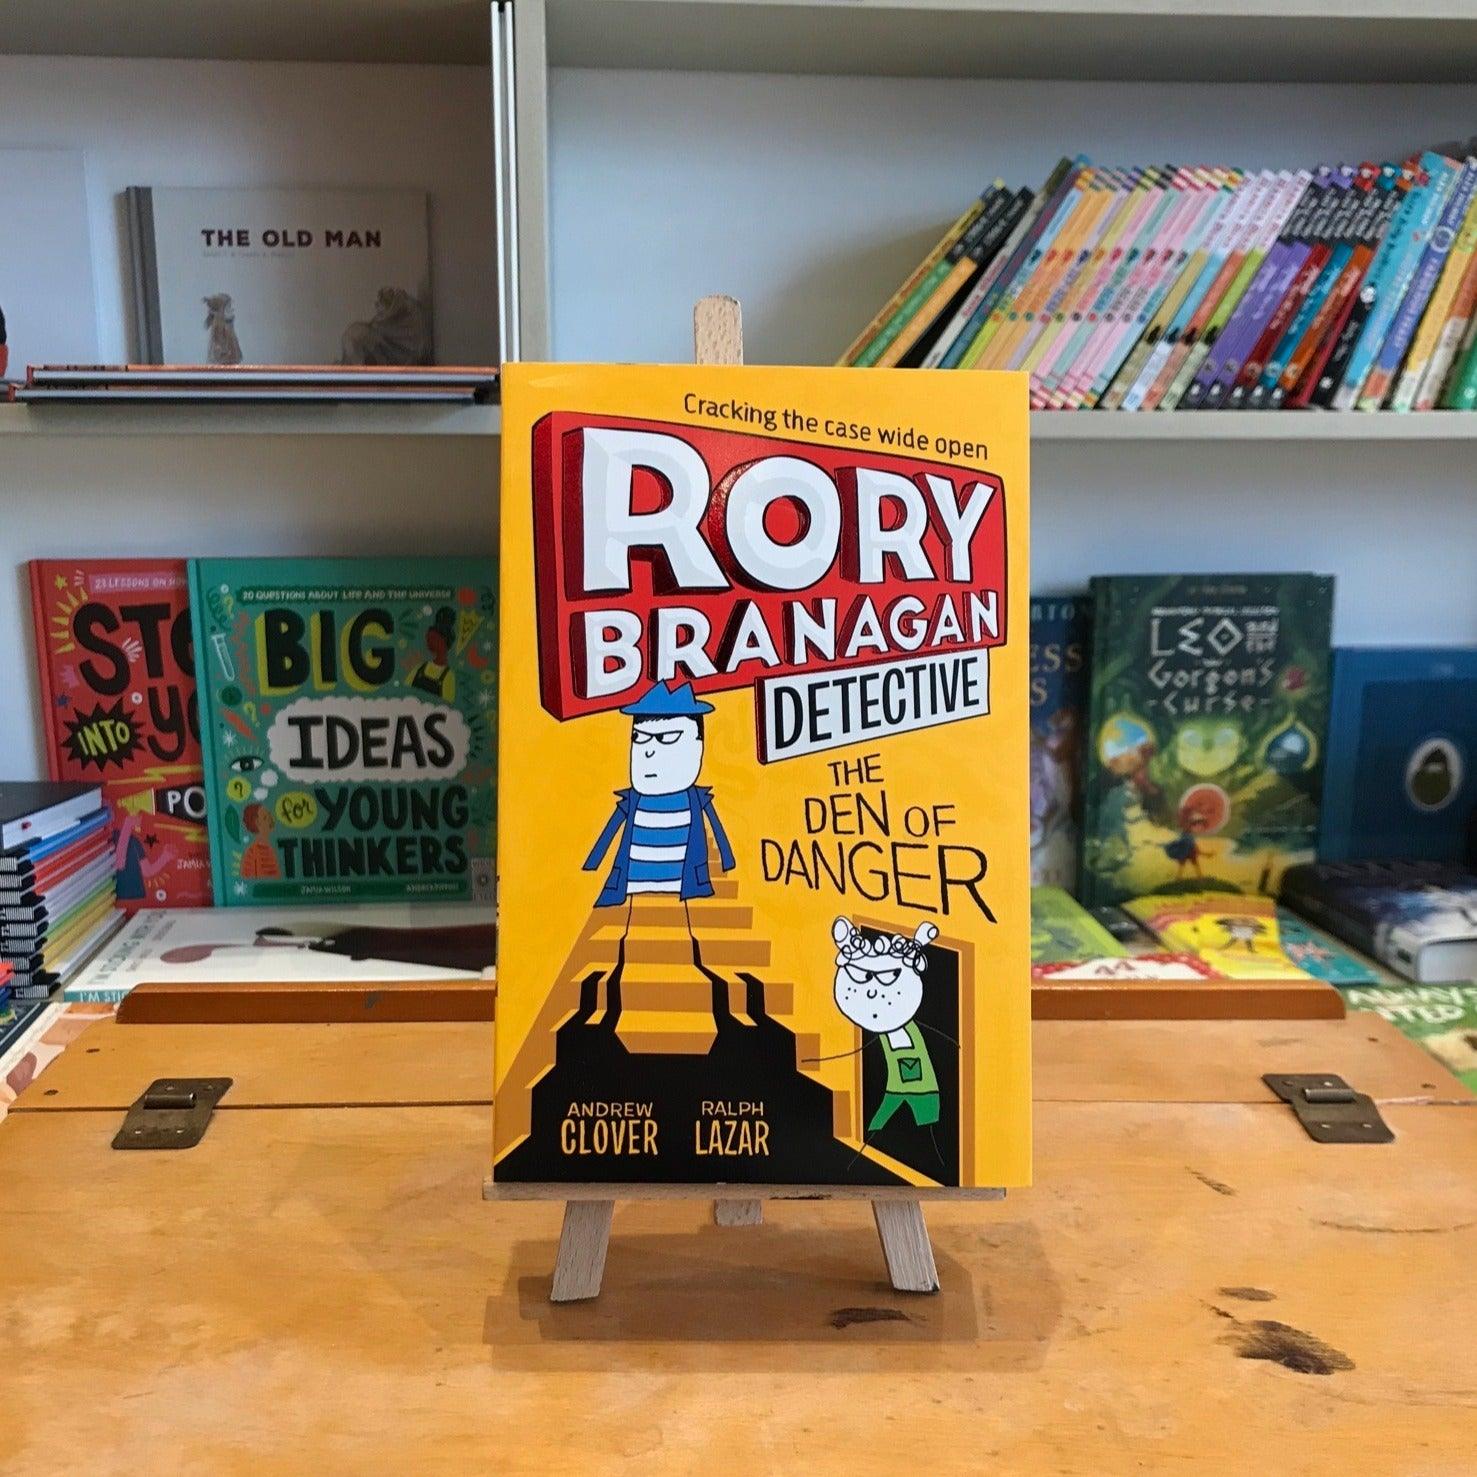 Detective　and　–　Danger　Rory　6-　of　The　Den　Branagan　bk　Bea　Ottie　the